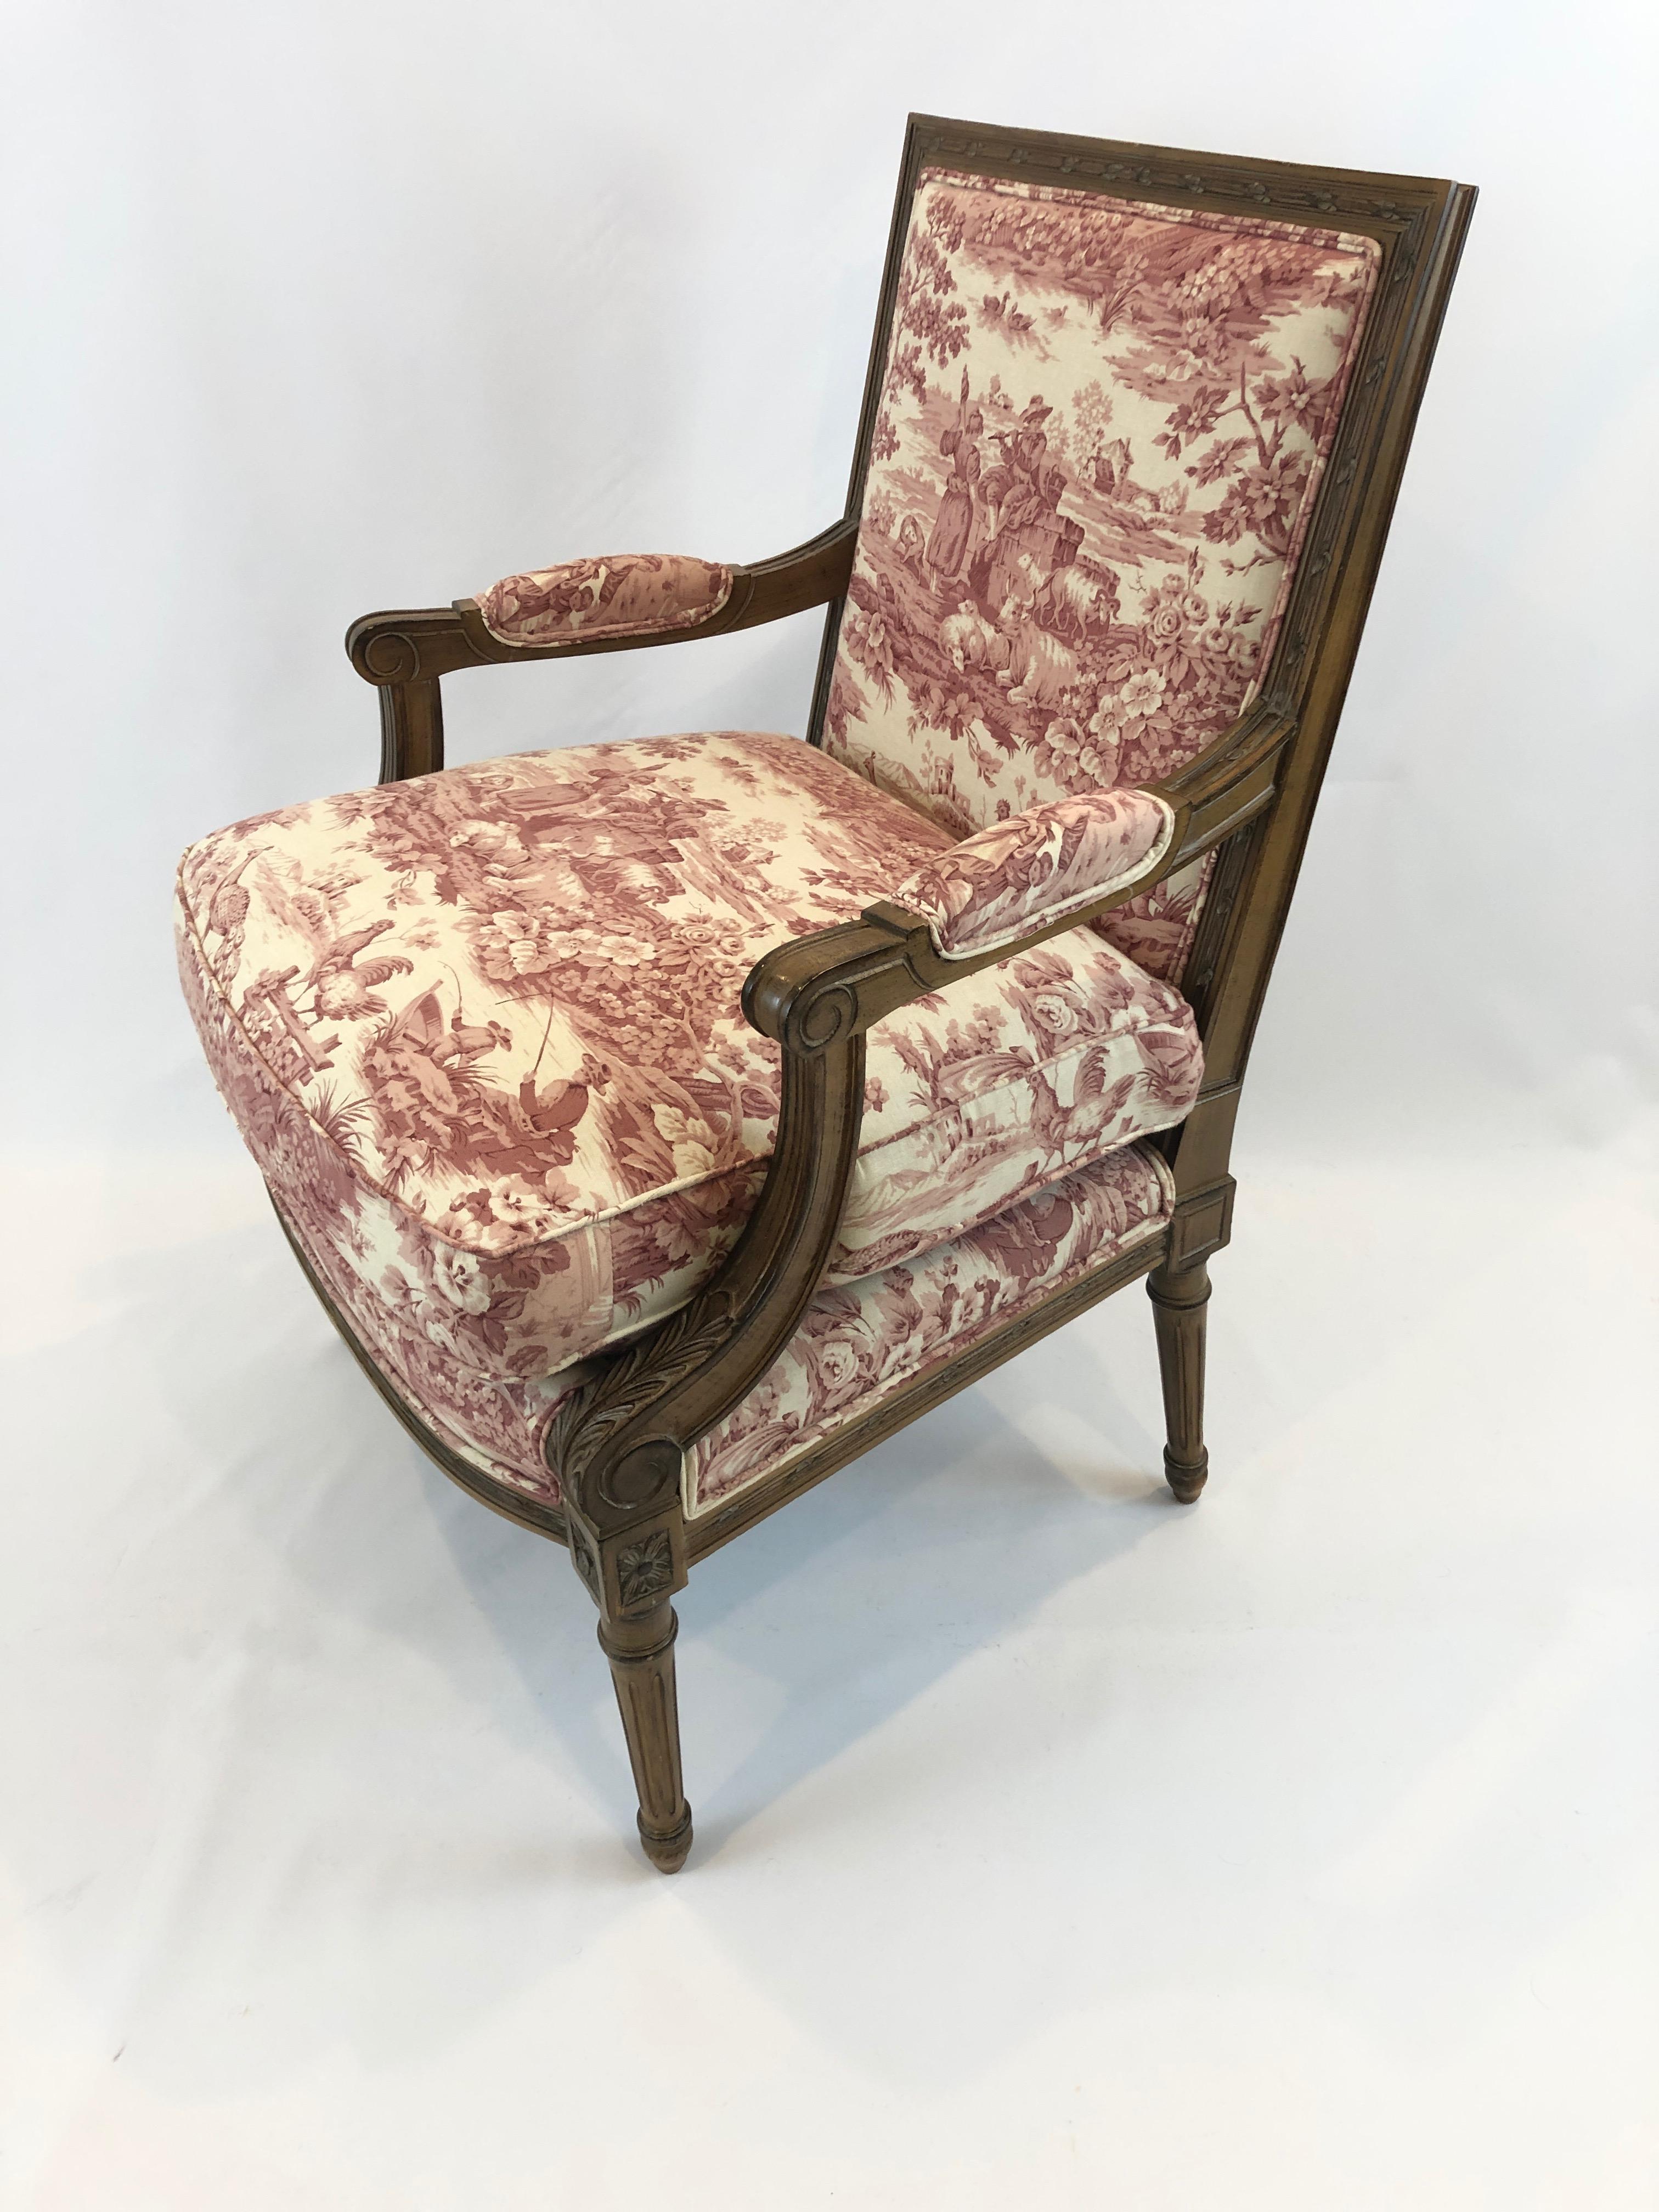 Stately comfortable carved and antiqued fruitwood armchair in the French style having lovely rasberry and cream toile upholstery. Attributed to Girard Emelia.
Measures: Arm height 25 inches, seat depth 21.5.